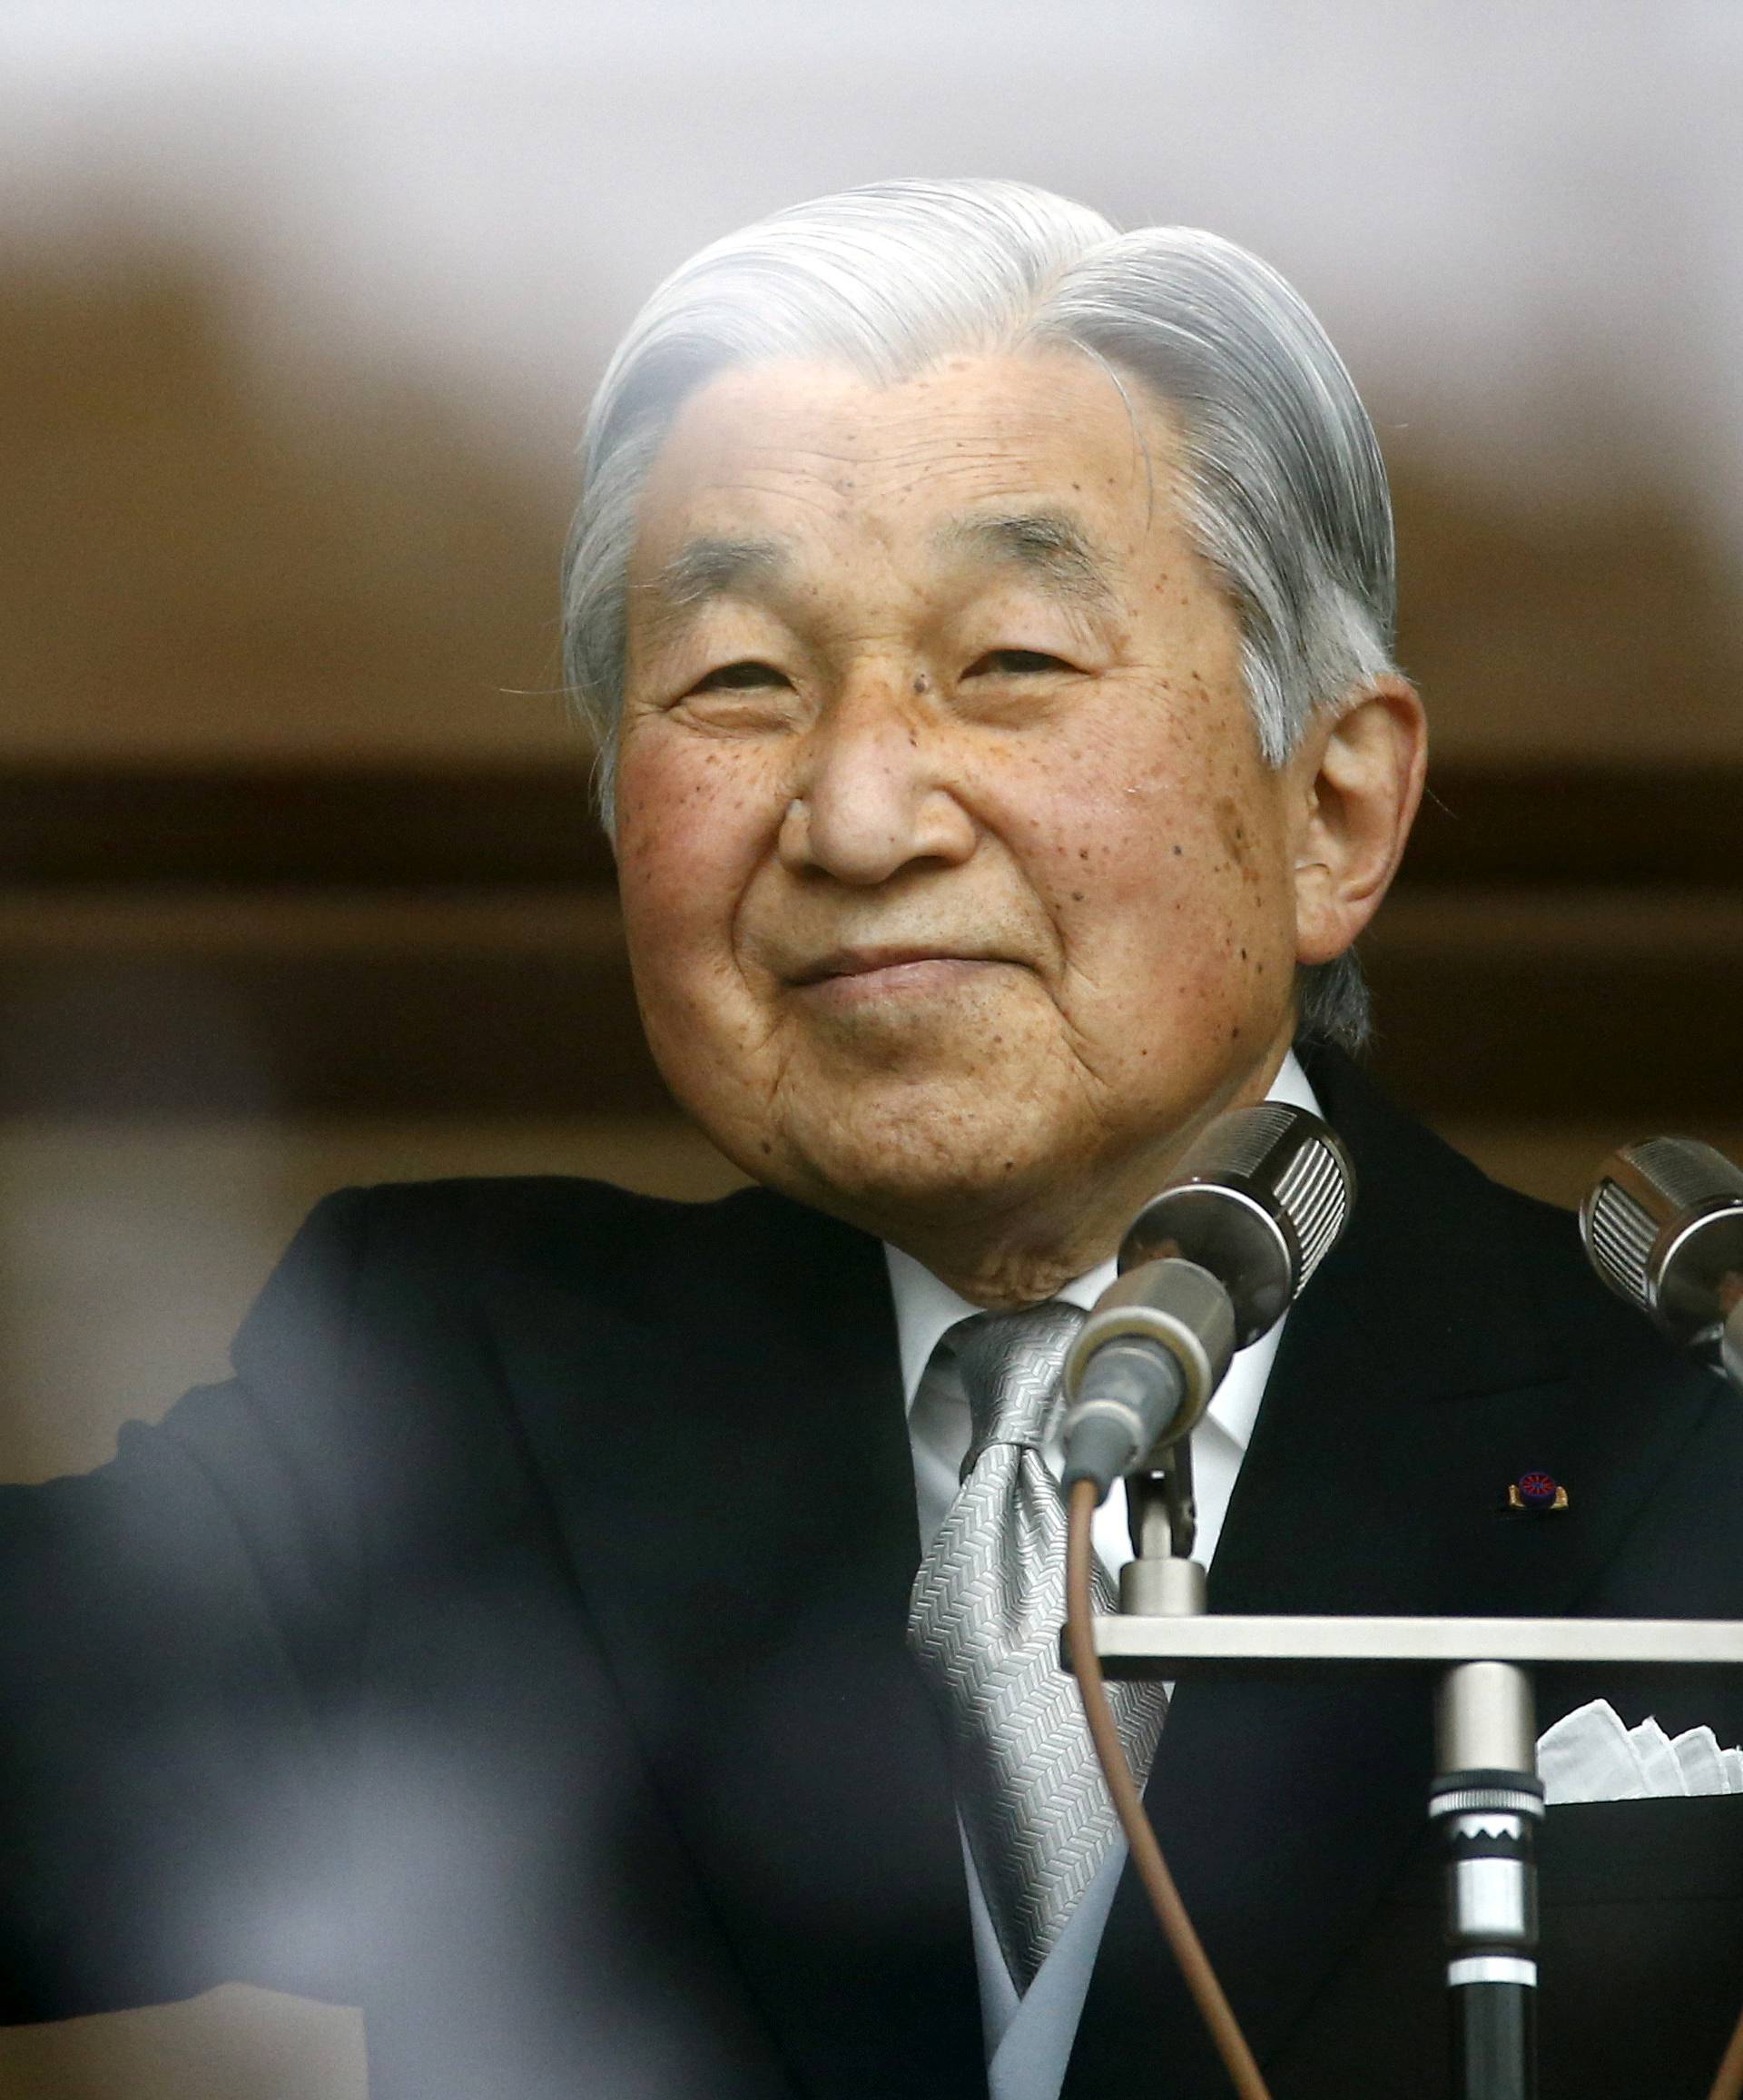 Japan's Emperor Akihito's waves to well-wishers at the Imperial Palace in Tokyo